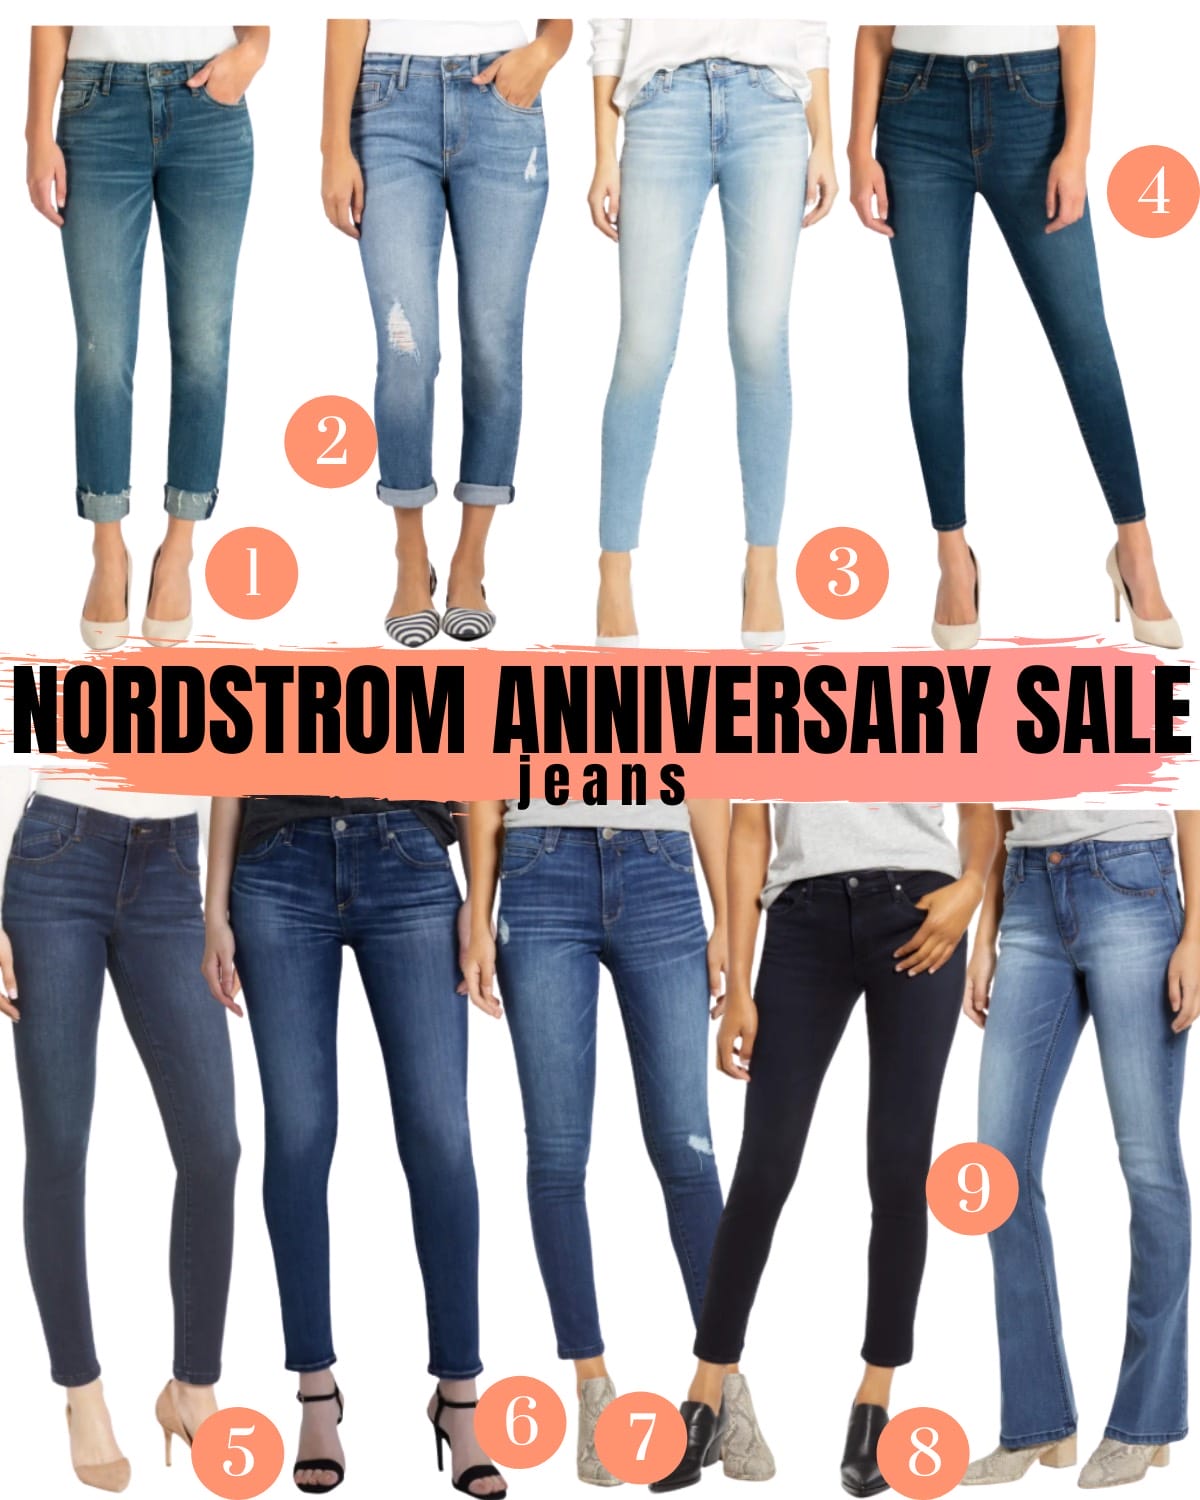 Nordstrom Anniversary Sale 2020 jeans